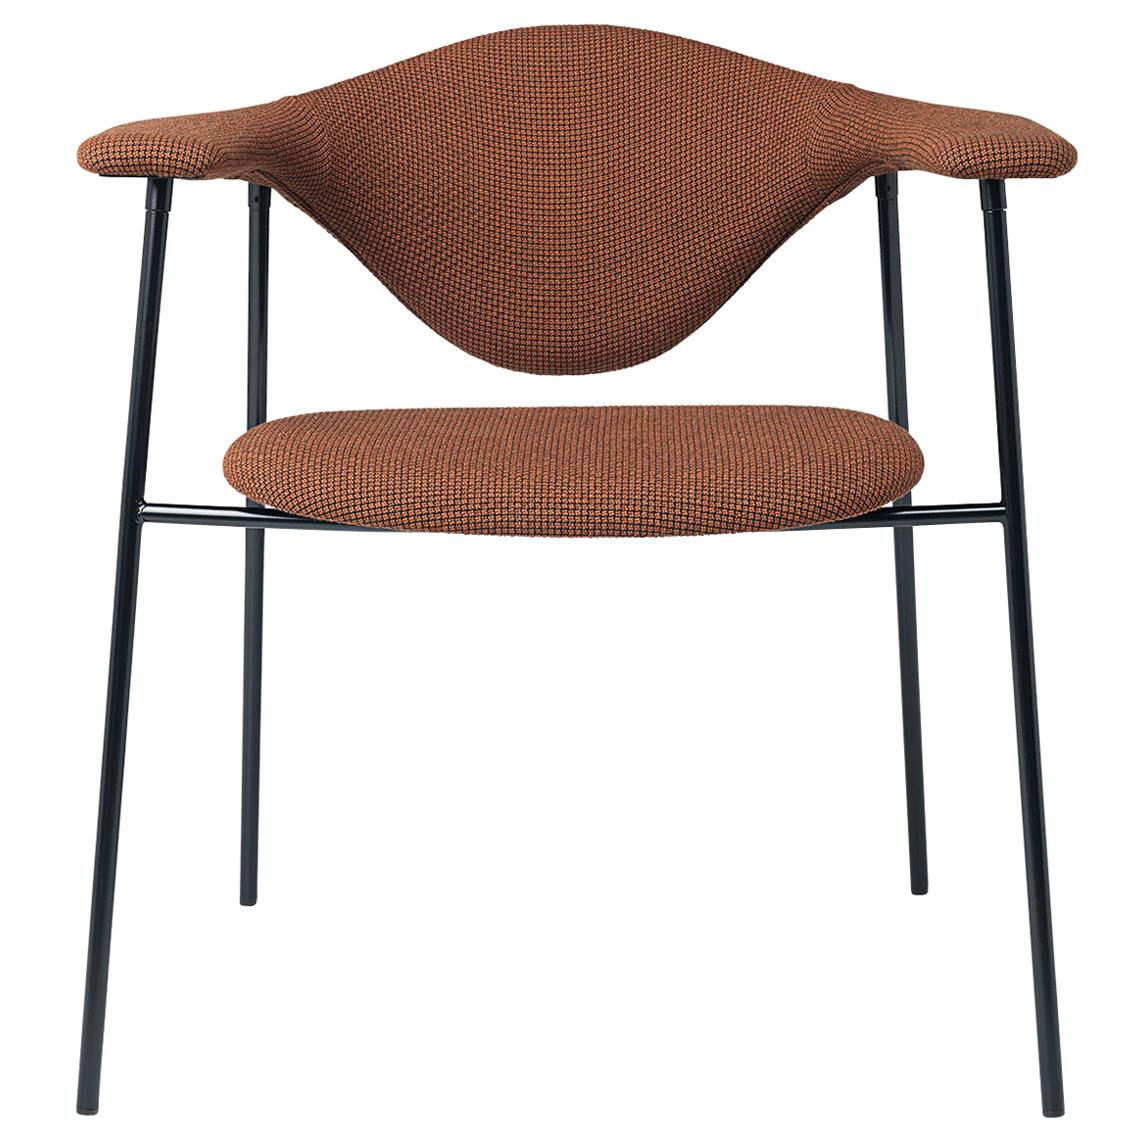 Masculo Dining Chair, Fully Upholstered, 4 Leg For Sale